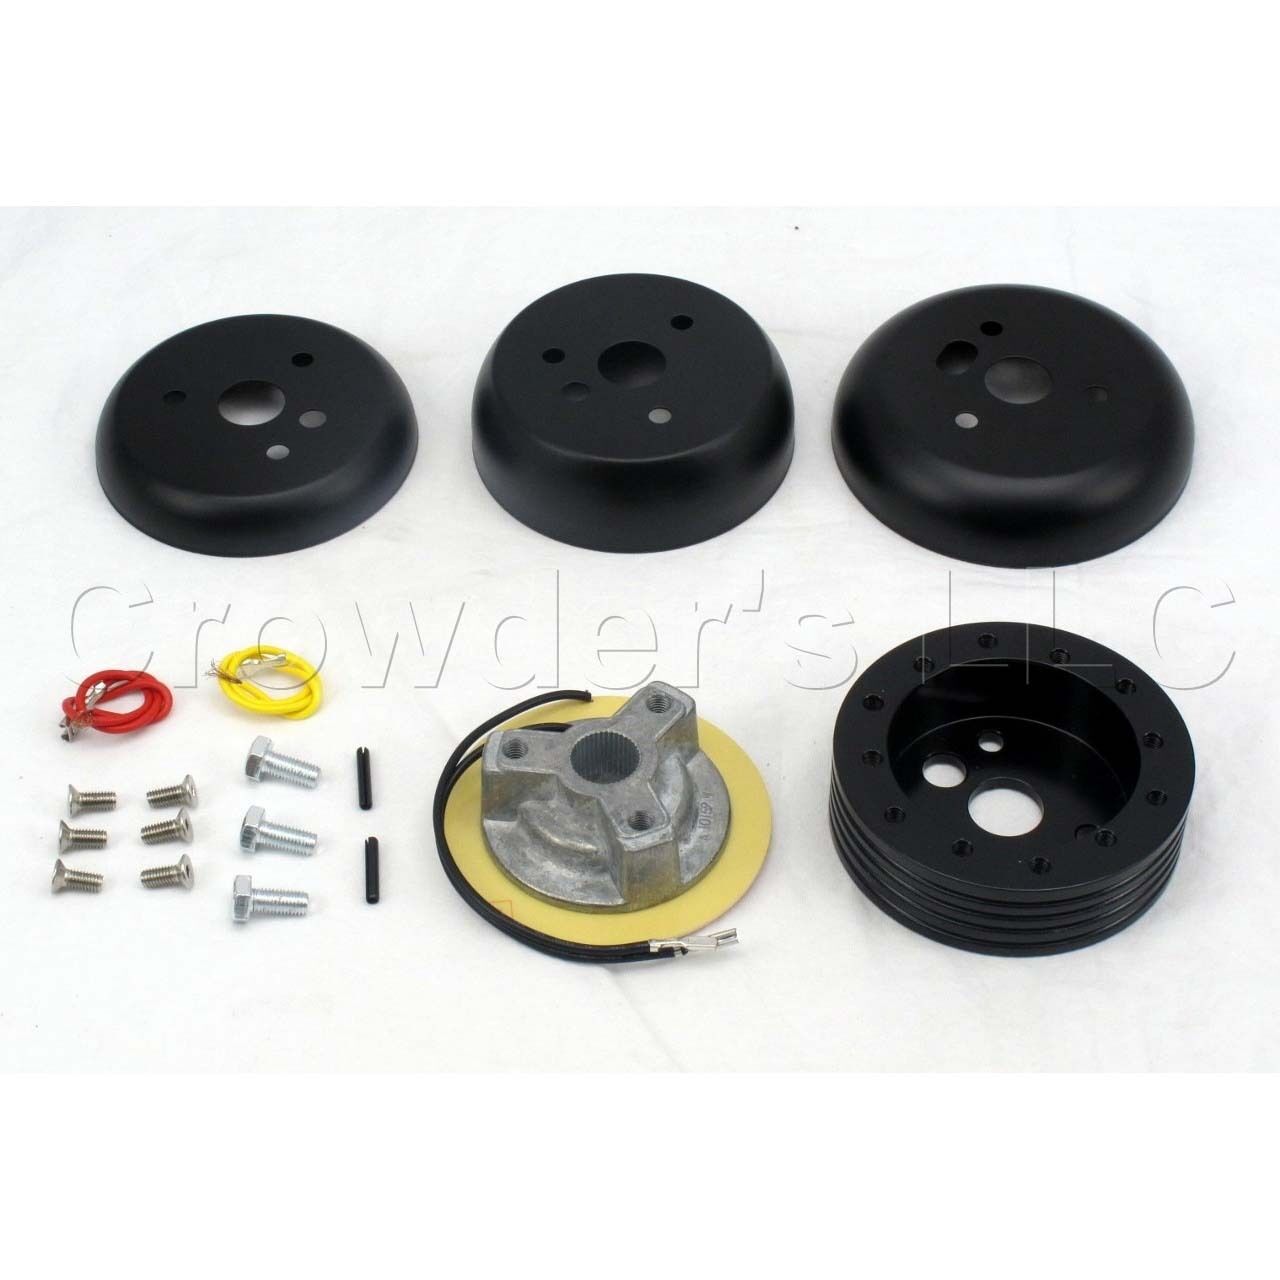 Steering Wheel Hub Adapter for Nardi Personal to fit Ford Bronco Comet Mustang